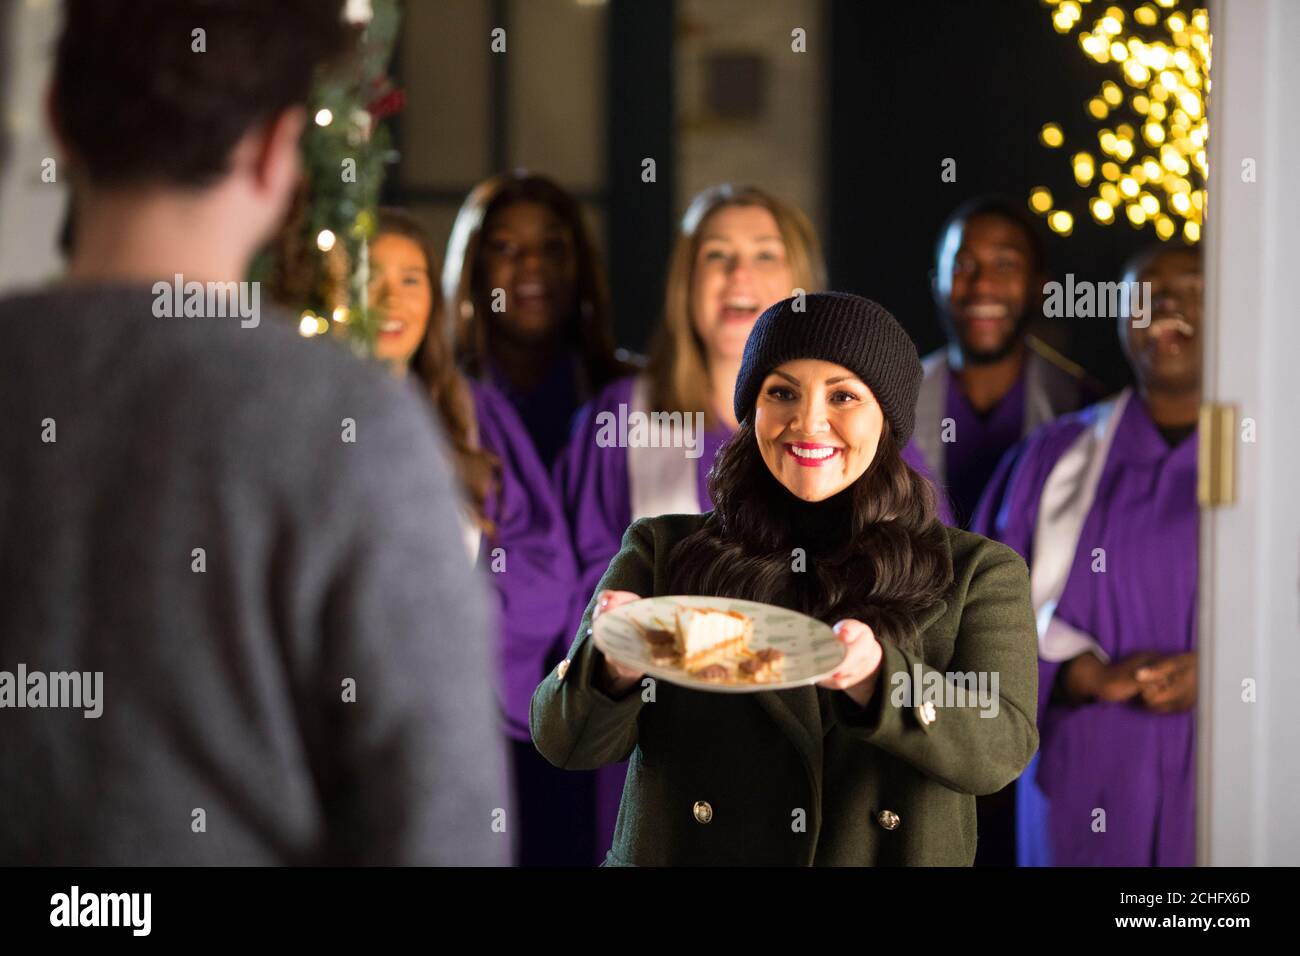 EDITORIAL USE ONLY Martine McCutcheon joins Christmas carollers to launch a sweet treat giveaway by online food delivery service Uber Eats in partnership with Tinseltown. PA Photo: Issue date: Tuesday December 3, 2019. Lucky customers will receive from the Tinseltown restaurant a Banoffee pie or chocolate biscuits via the online food delivery service in London on December 6th and Birmingham on December 9th. Photo credit should read: David Parry/PA Wire Stock Photo